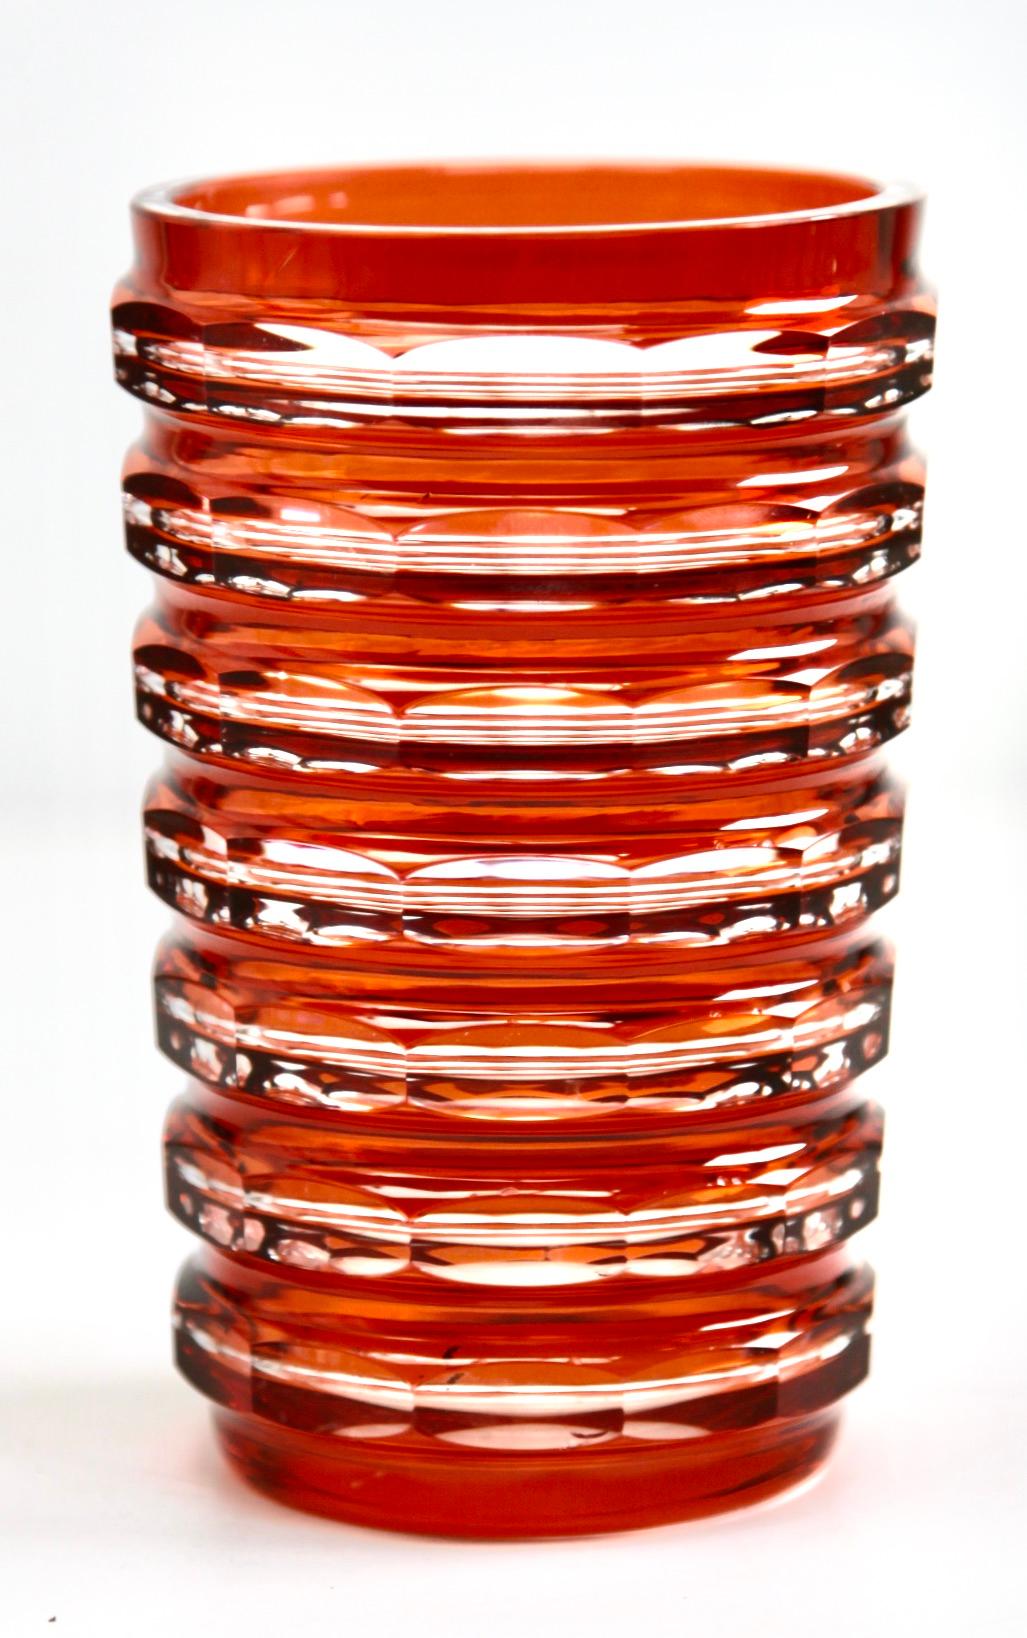 Val Saint Lambert crystal vase cut-to-clear, 1950s
by Val Saint-Lambert.

Color: vsl Clair double Aurore 
And popularly called orange

Beautiful Val Saint-Lambert hexagonal crystal vases, handcut-to-clear, the glass is thick, deeply and evenly